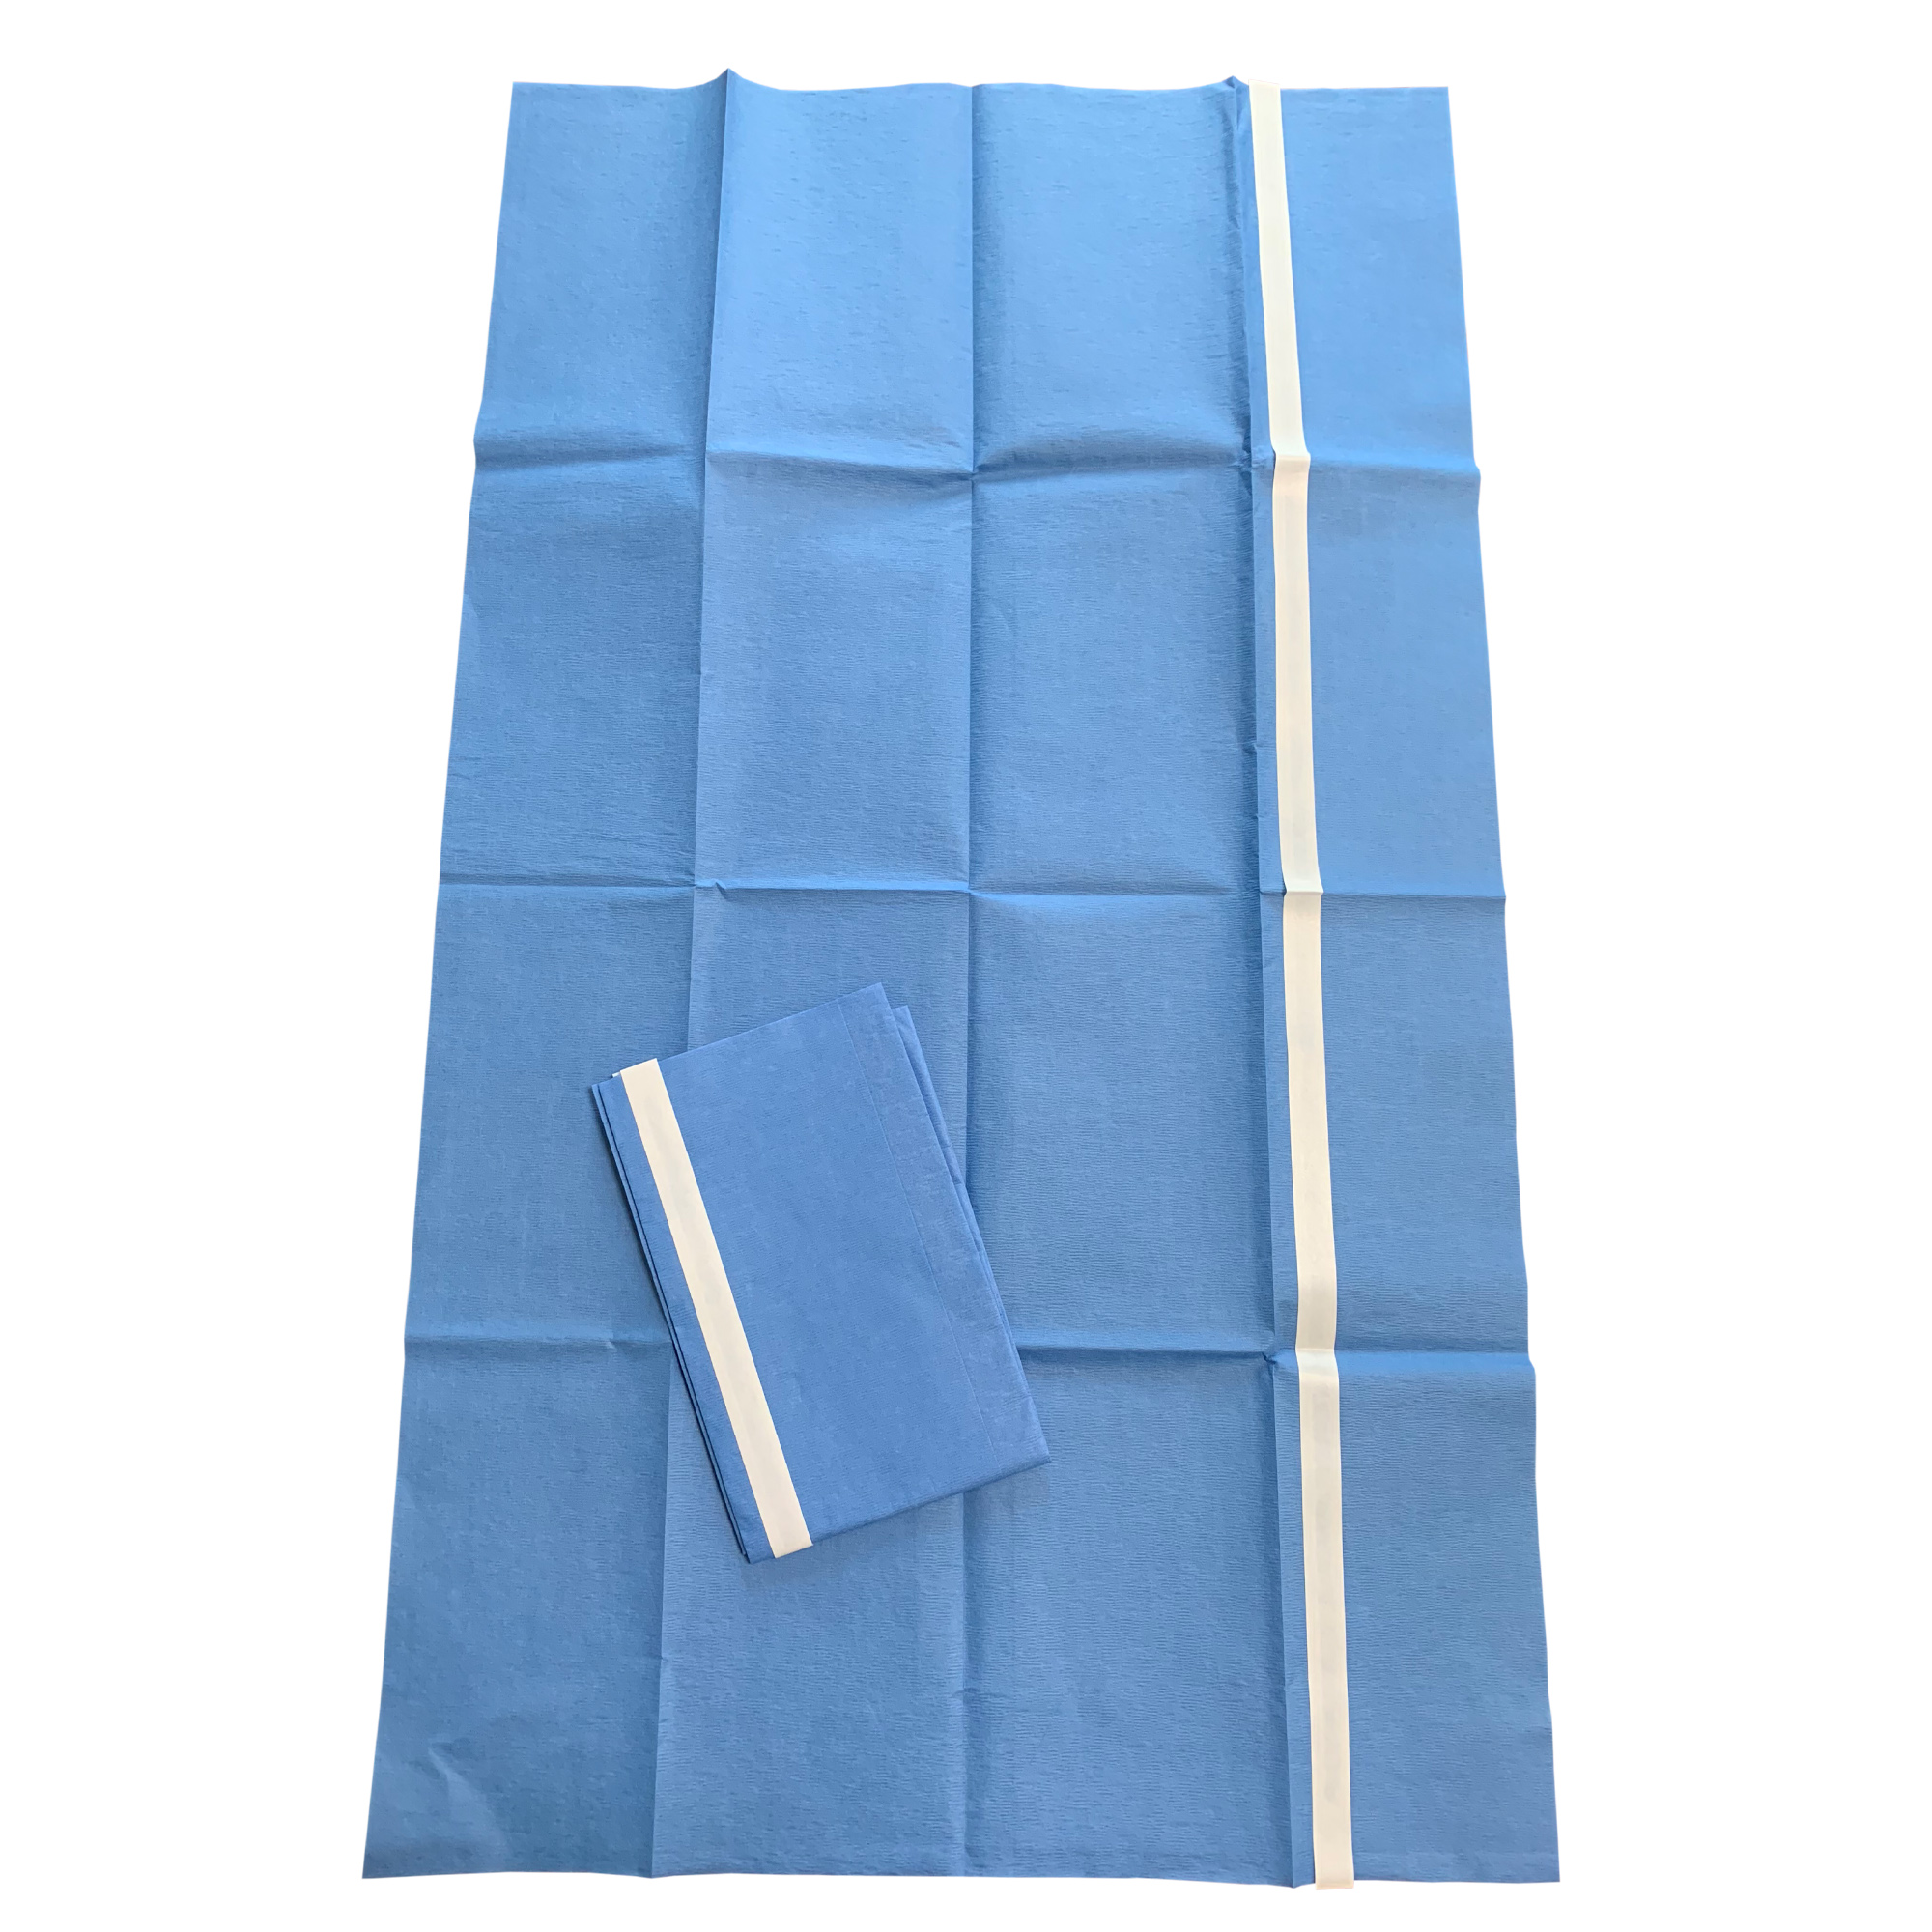 Surgical Side Drape with Adhesive